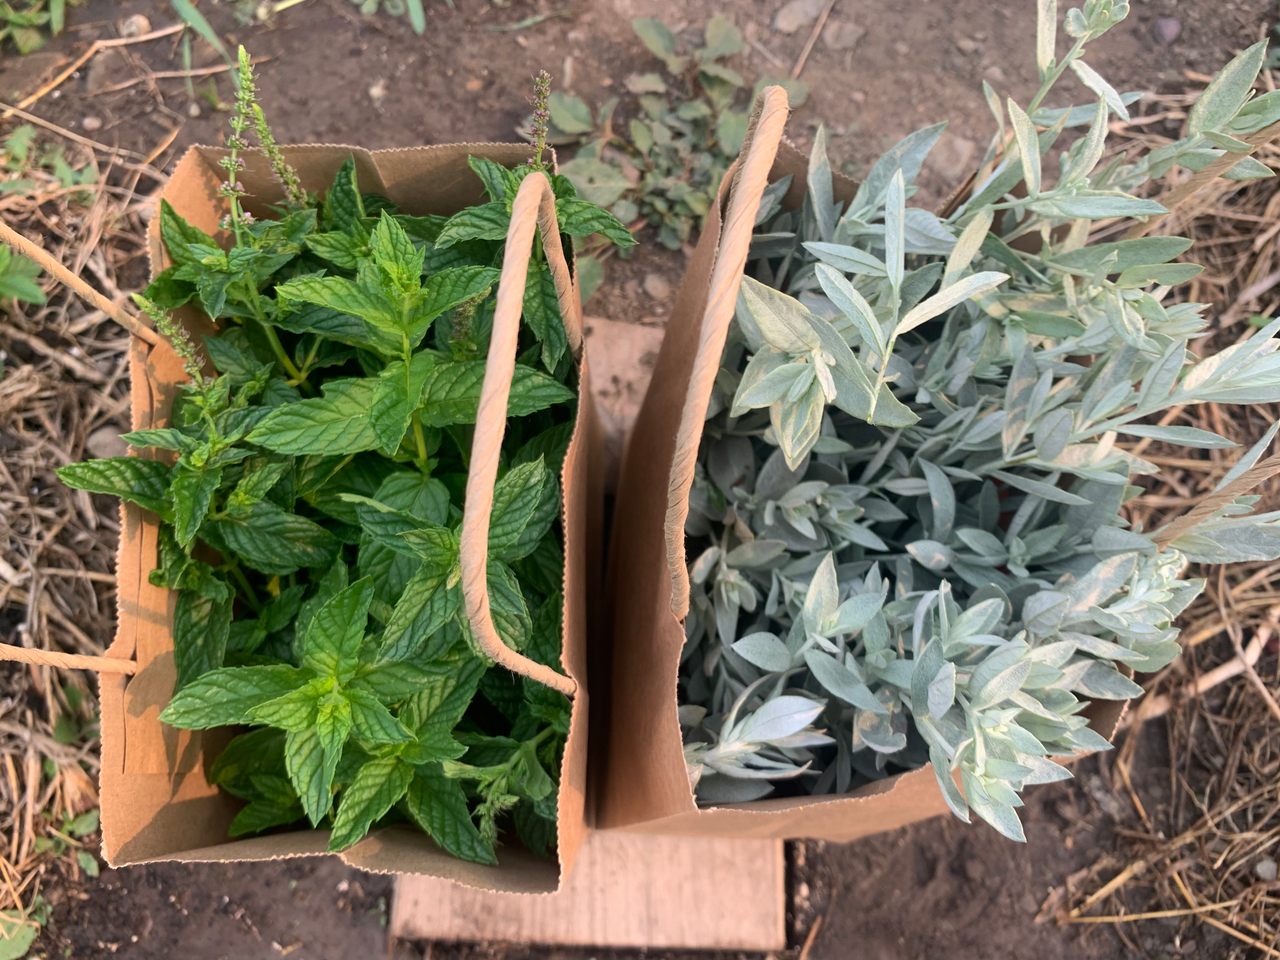 Harvested herbs, ready to be made into tea. 